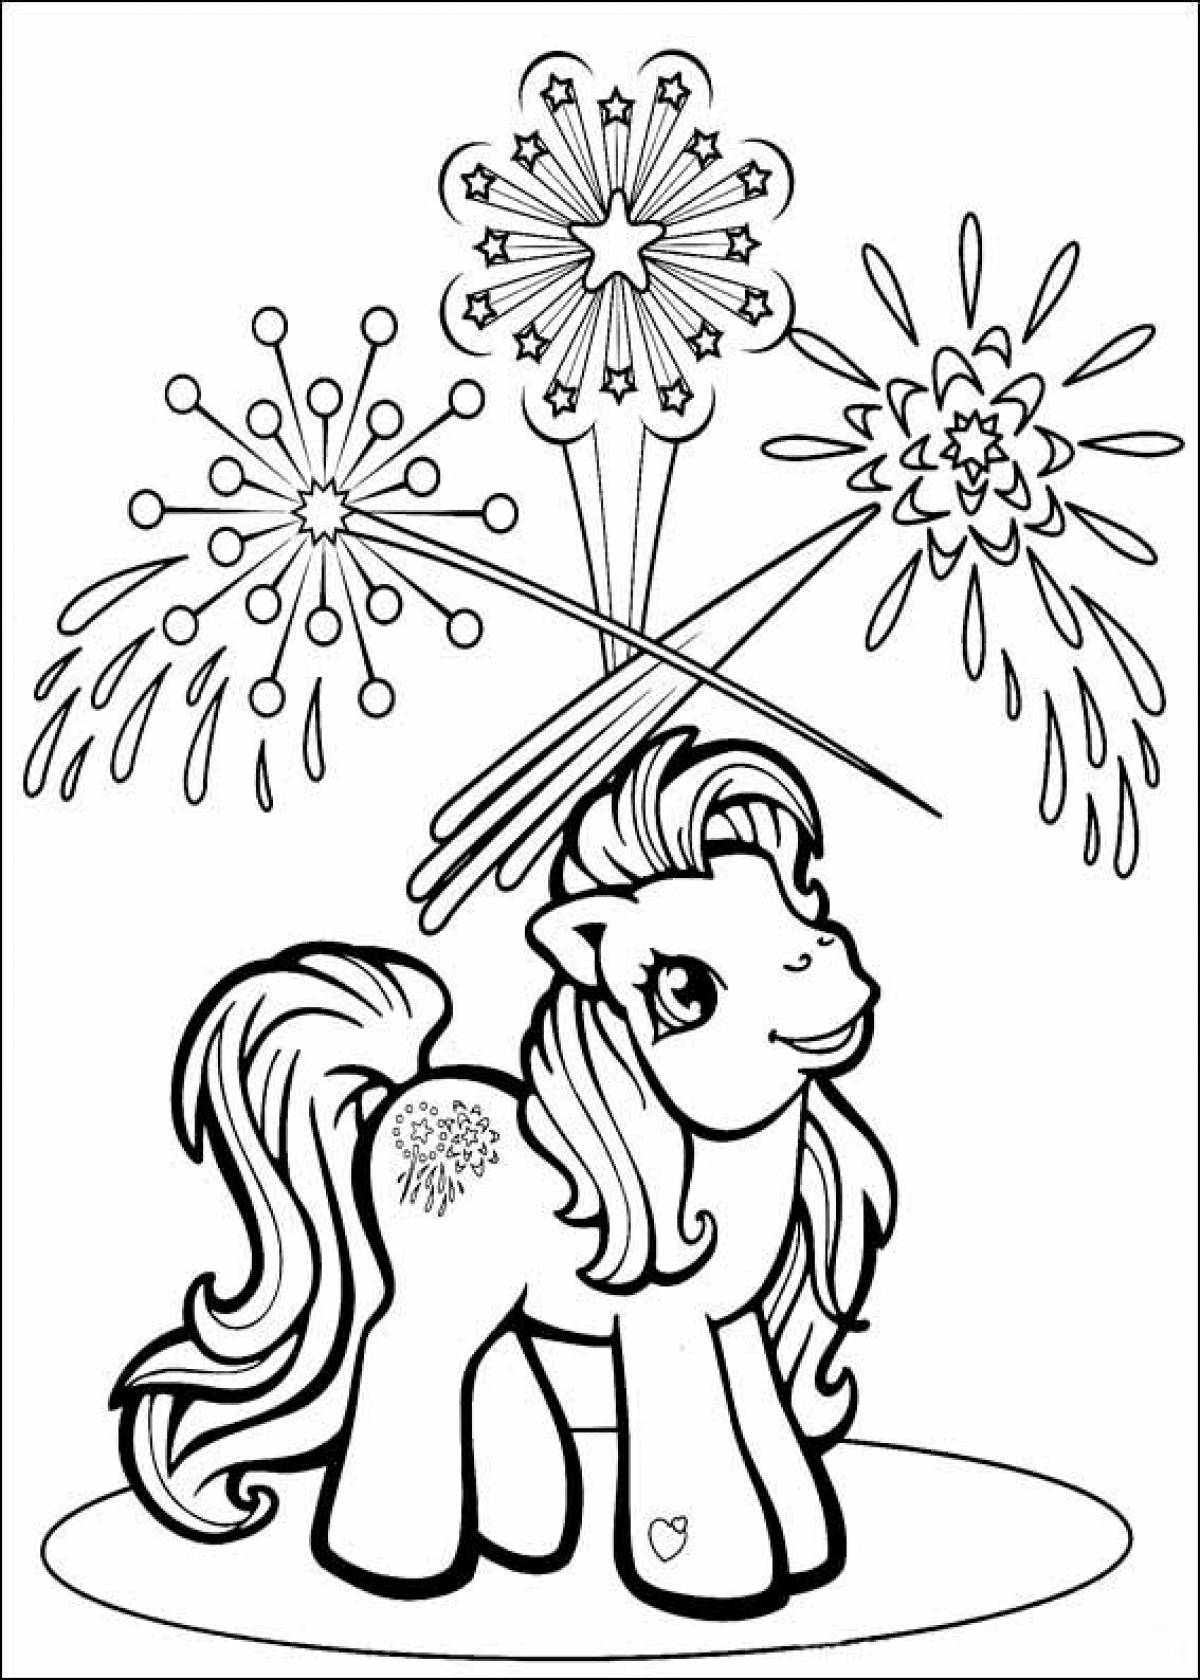 Ponyville pony coloring pages